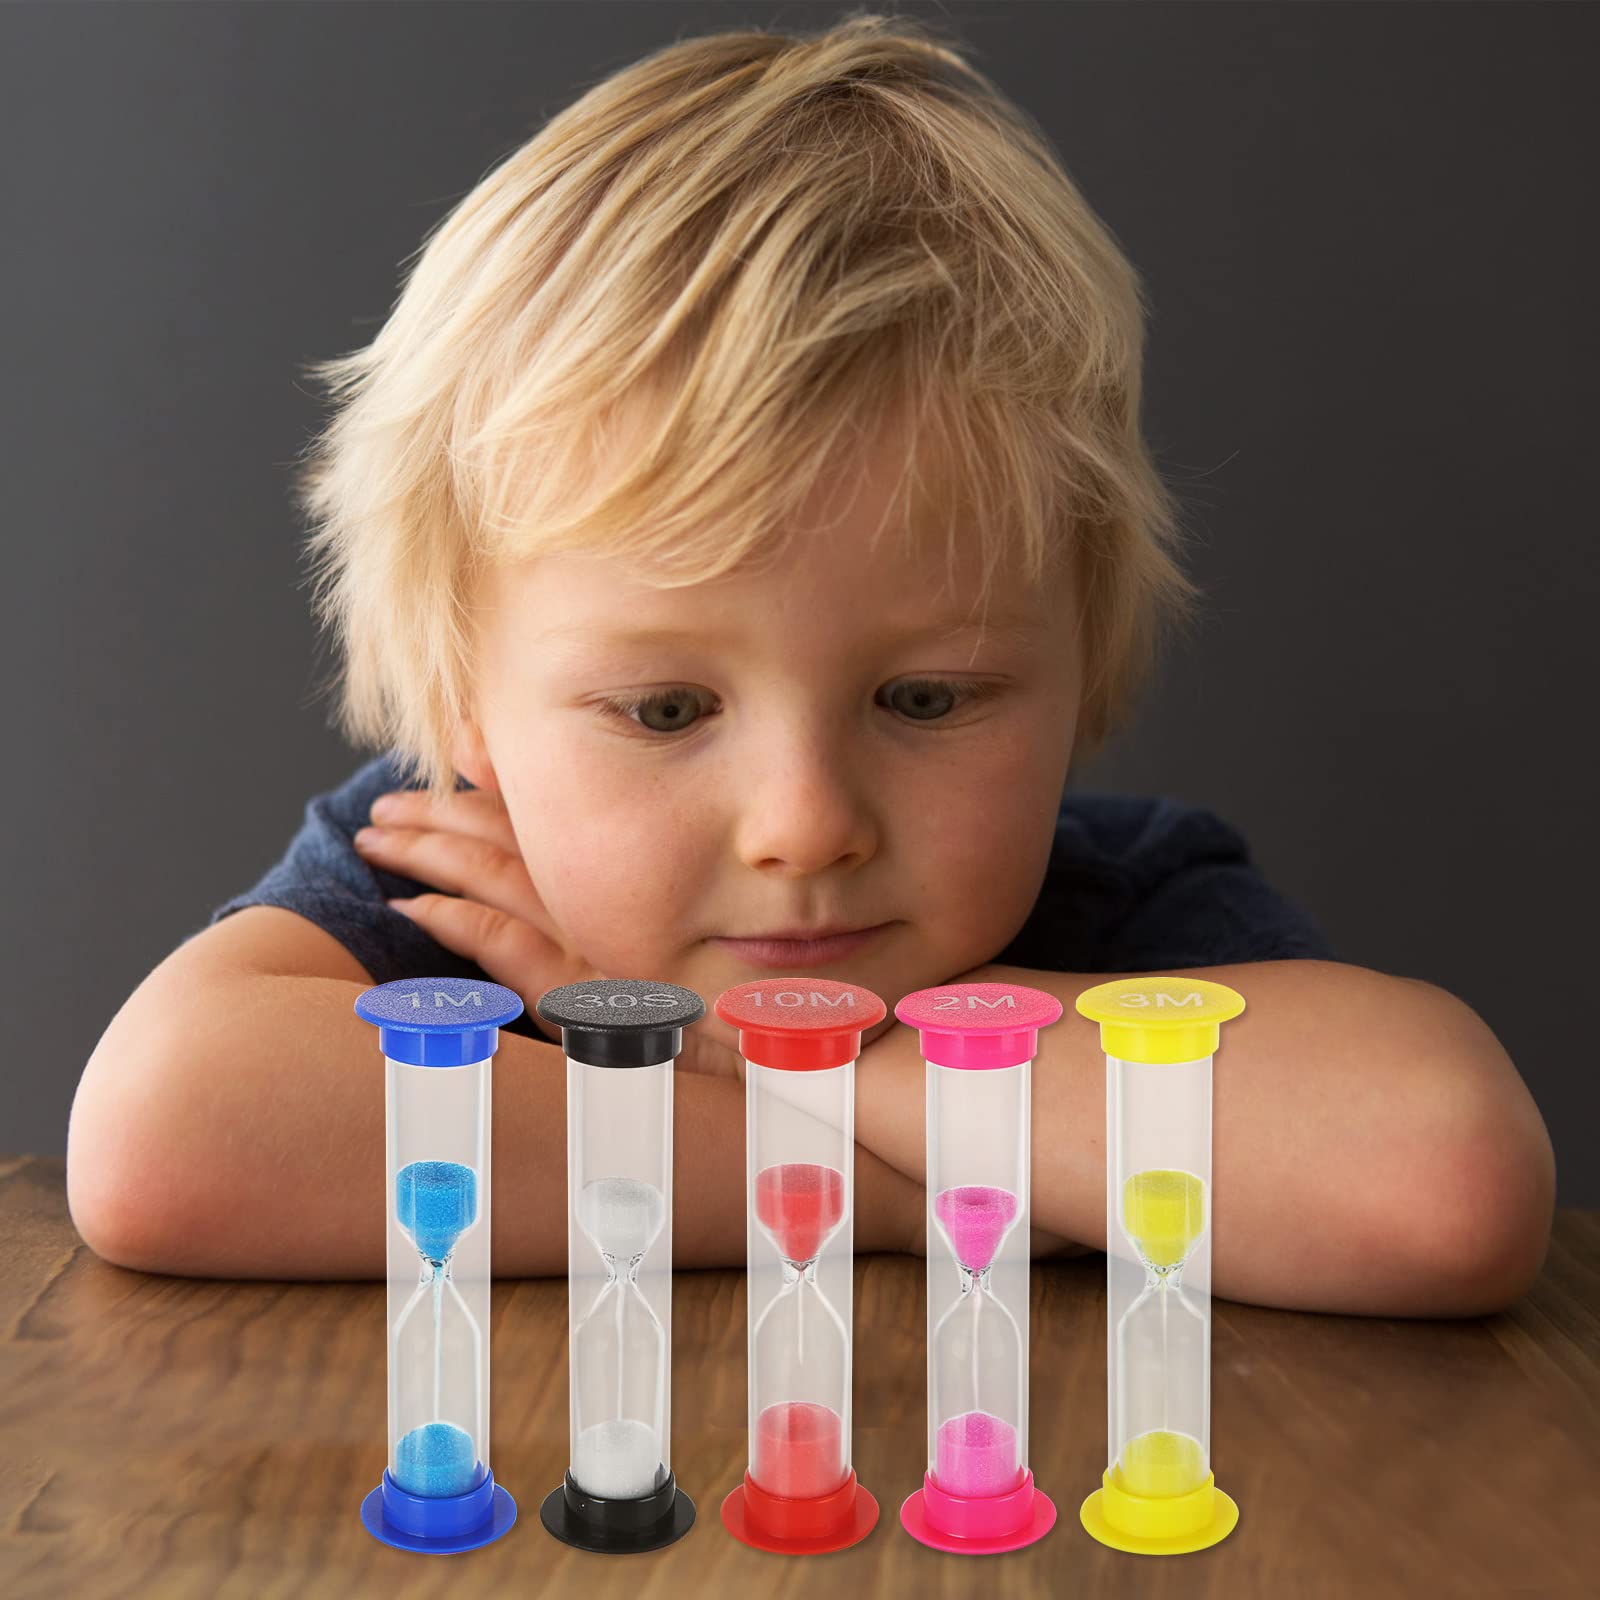 36 Pcs Sand Timer for Kids Set, Plastic Hourglass Sandglass Sand Clock Timers Set 30s / 1min / 2mins / 3mins / 5mins / 10mins for Classroom, Kitchen, Games, Office, Home